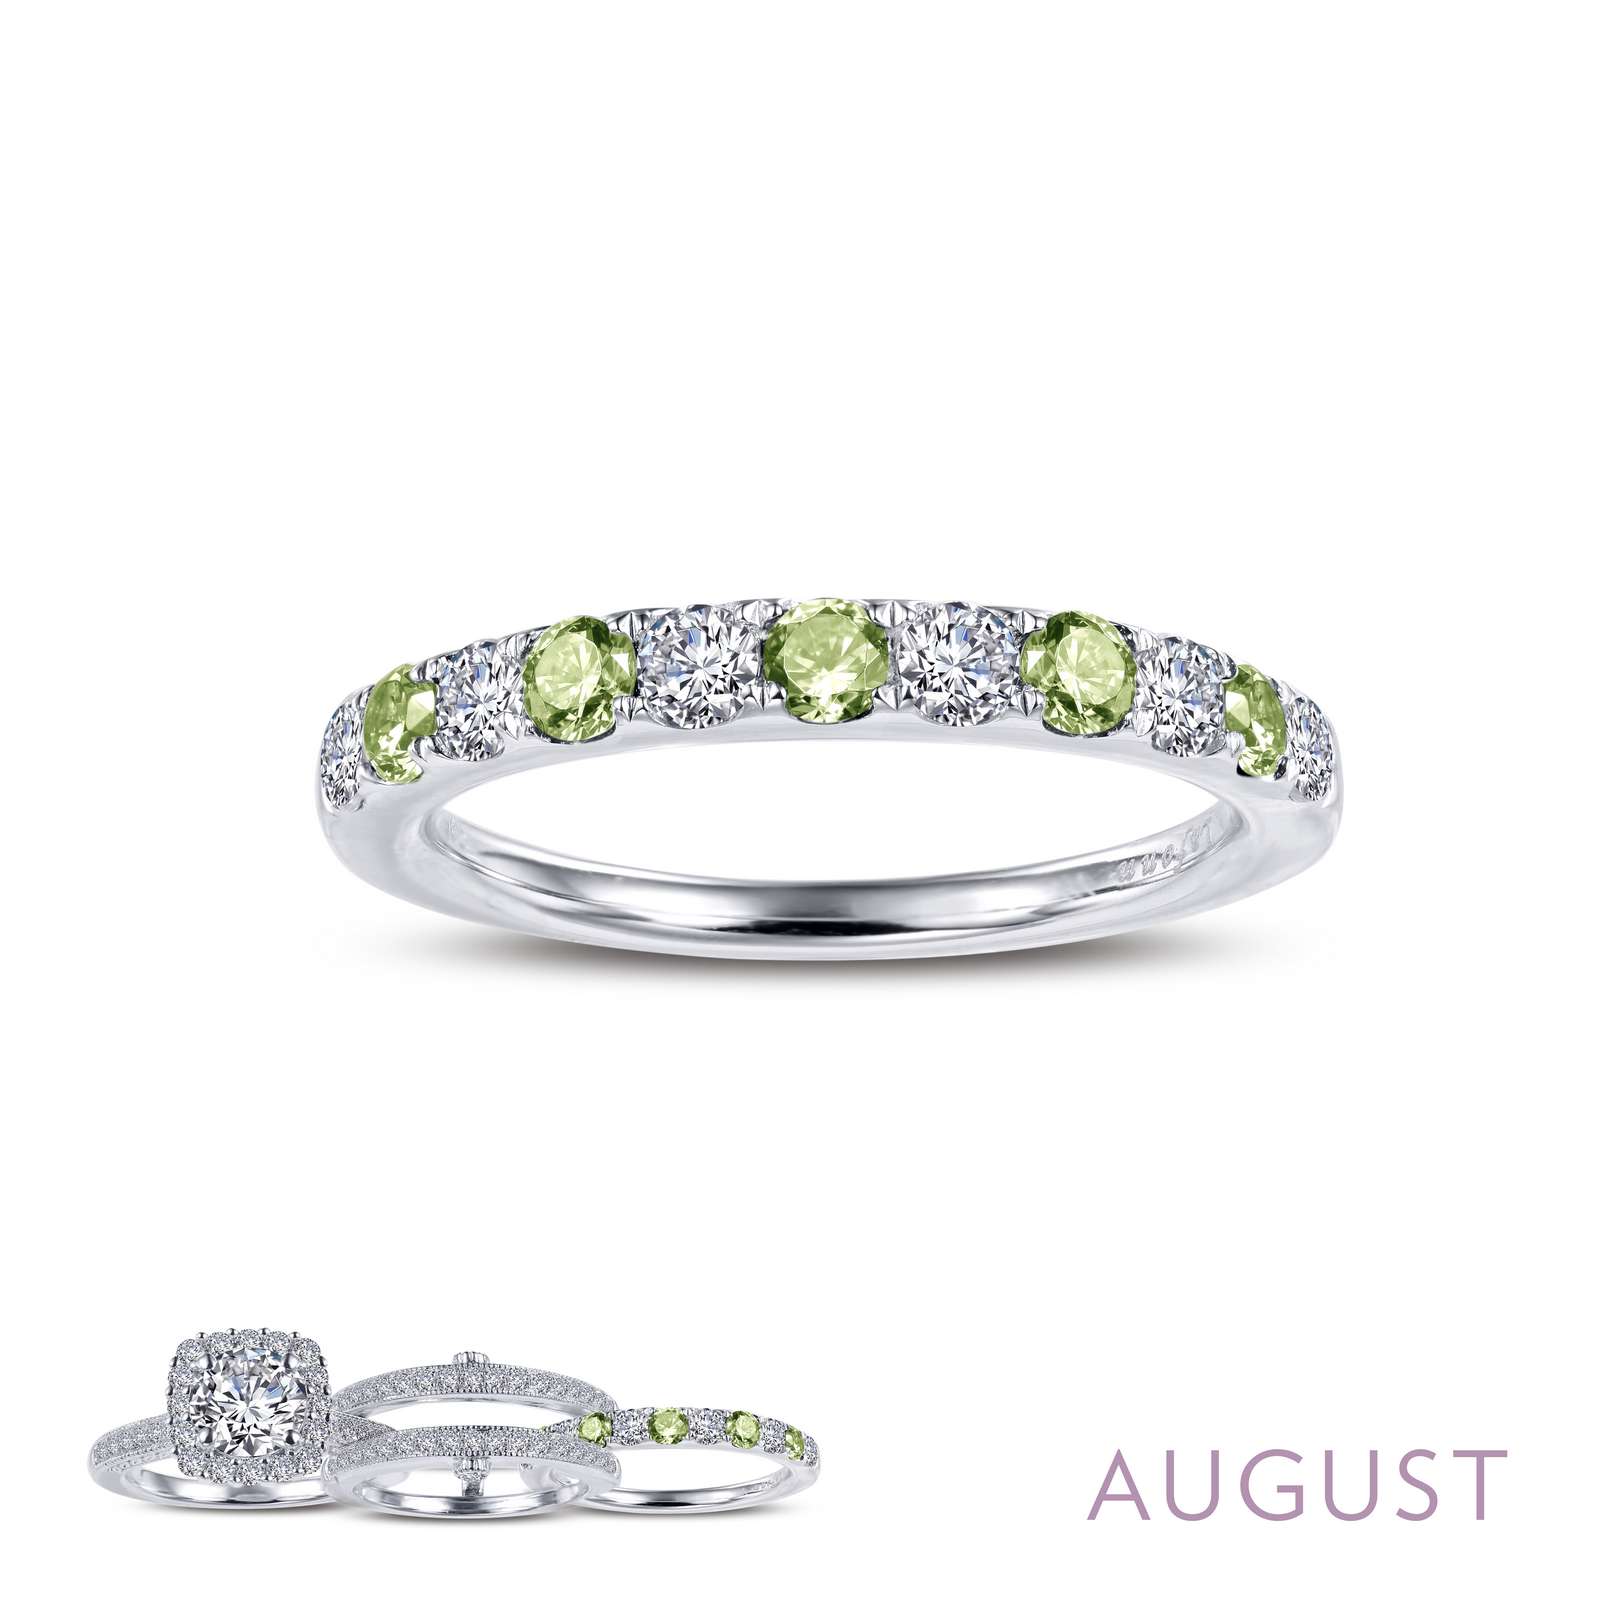 August Birthstone Ring Griner Jewelry Co. Moultrie, GA